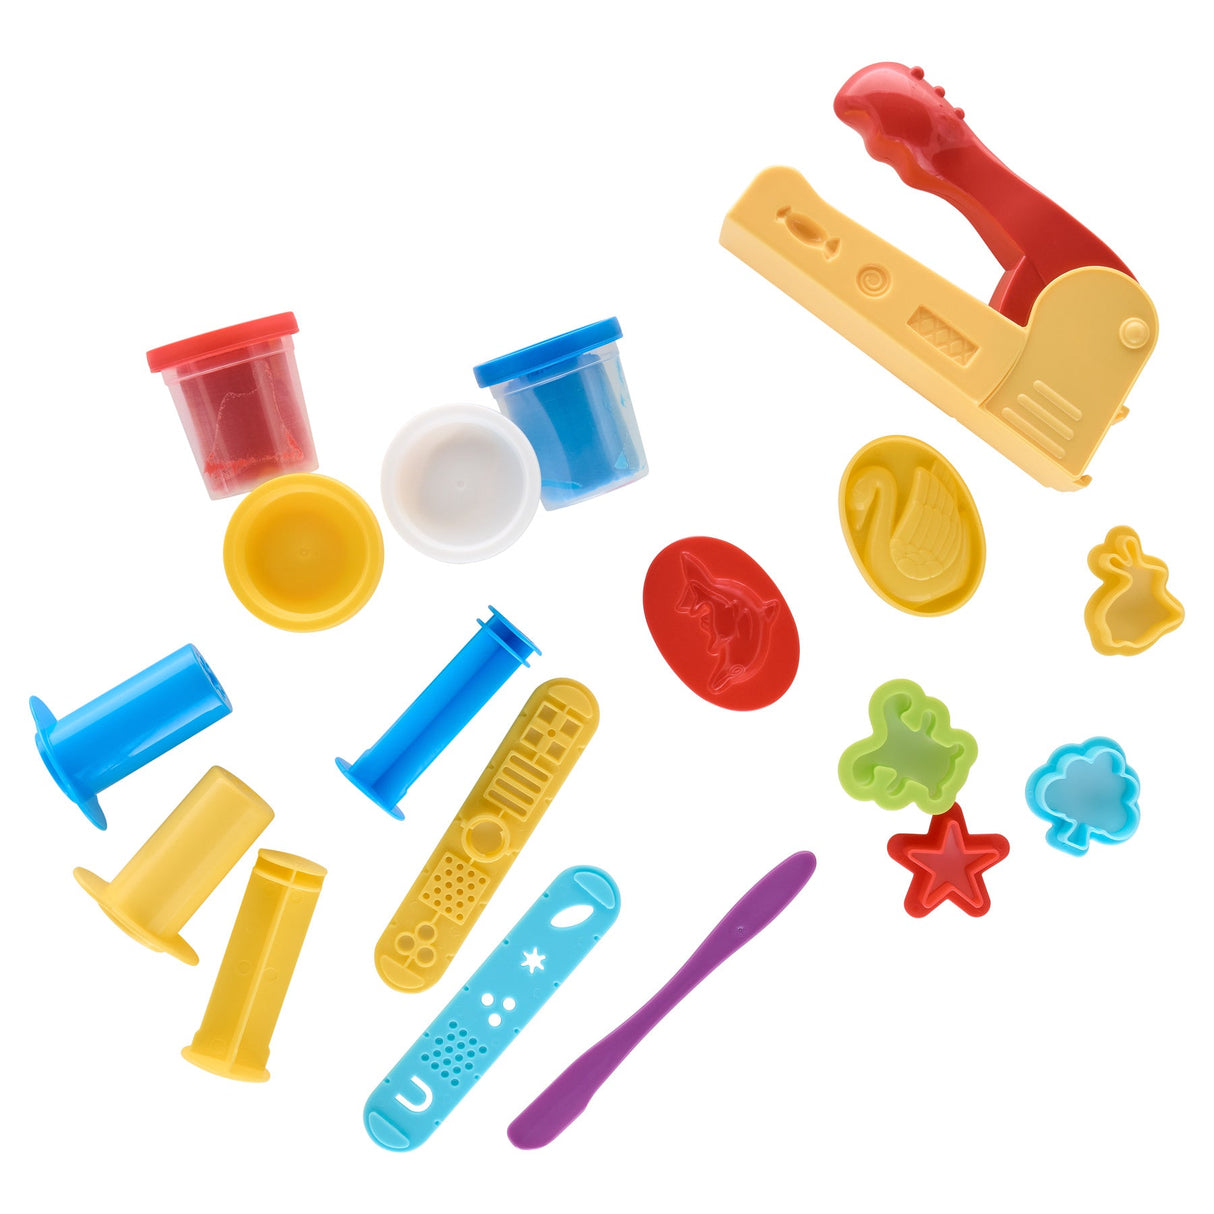 Maped Creativ Play Dough & Accessories Set including 4x56g Tubs-Modelling Dough-Maped|StationeryShop.co.uk